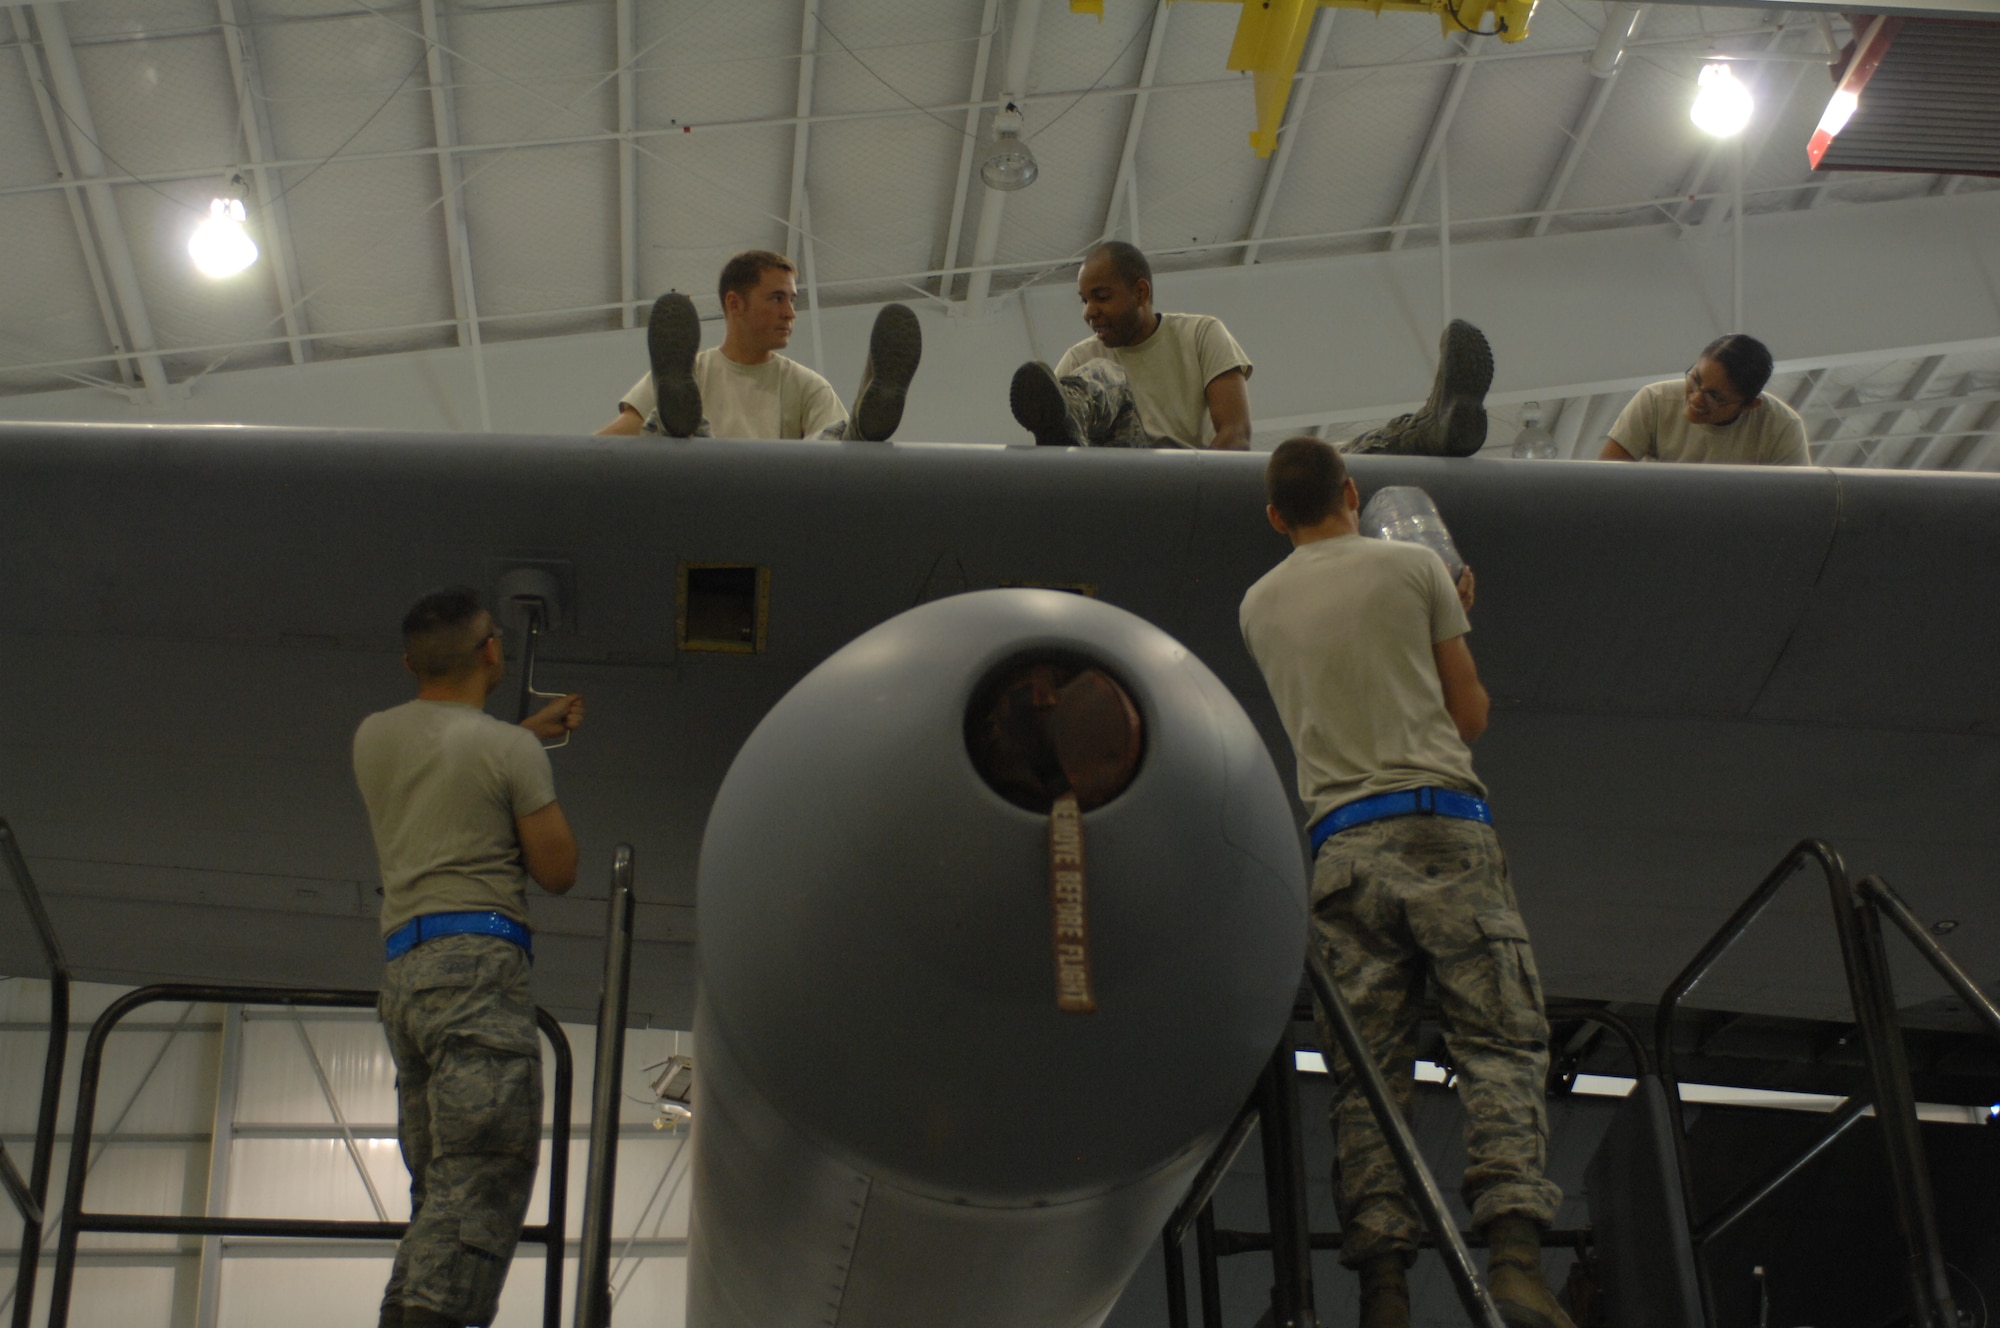 Airmen from the 755th Aircraft Maintenance Squadron re-attach the leading line on a wing of an EC-130H Compass Call aircraft at Davis-Monthan Air Force Base, Ariz. May 1, 2013. This EC-130H is one of 14 aircraft in the Air Force with the ability to find radio signals and has computer operators onboard with the knowledge to block these signals.(U.S. Air Force photo by Airman 1st Class Betty R. Chevalier/released)